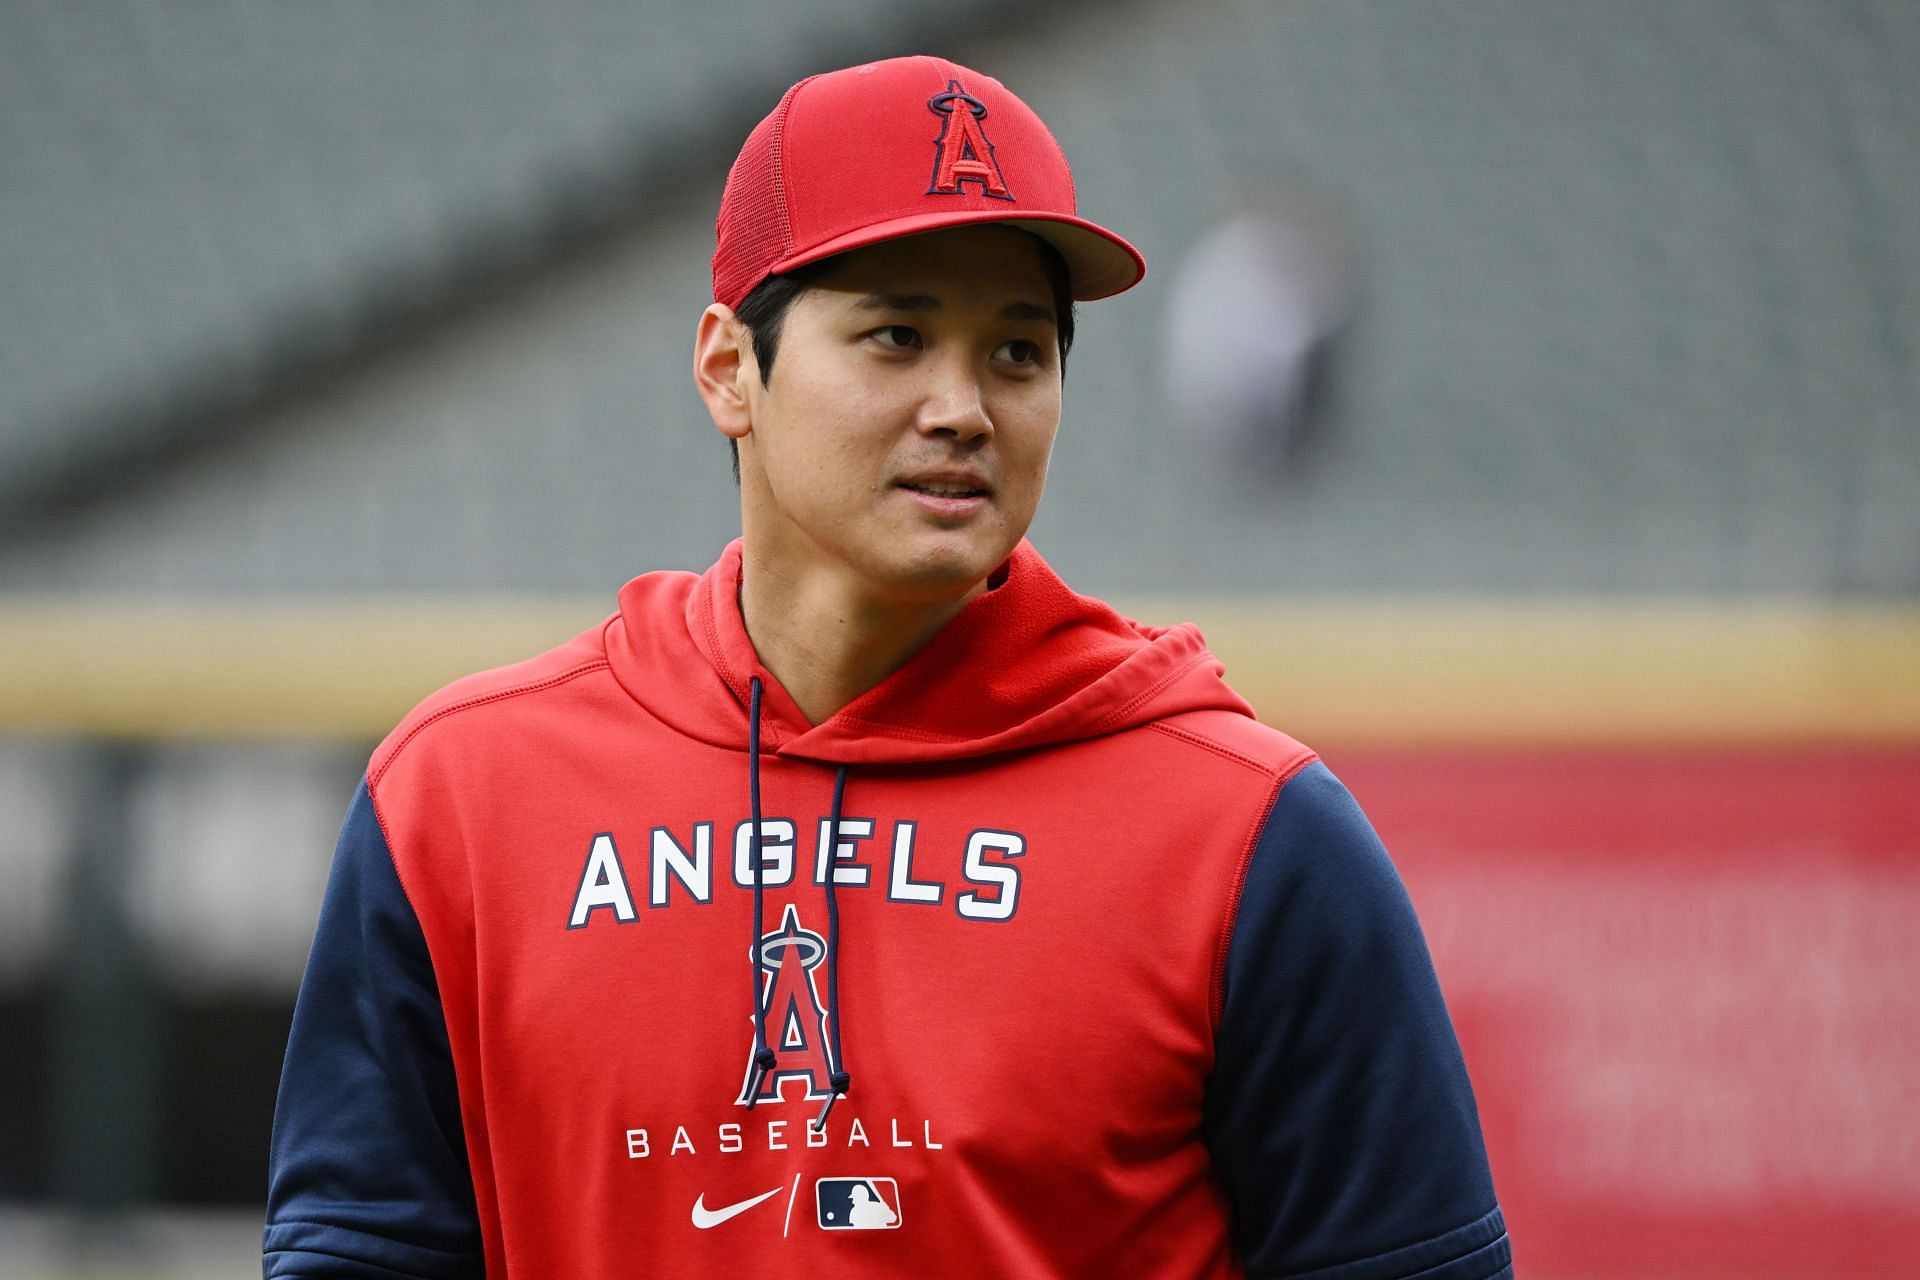 Shohei Ohtani of the Los Angeles Angels warms up.